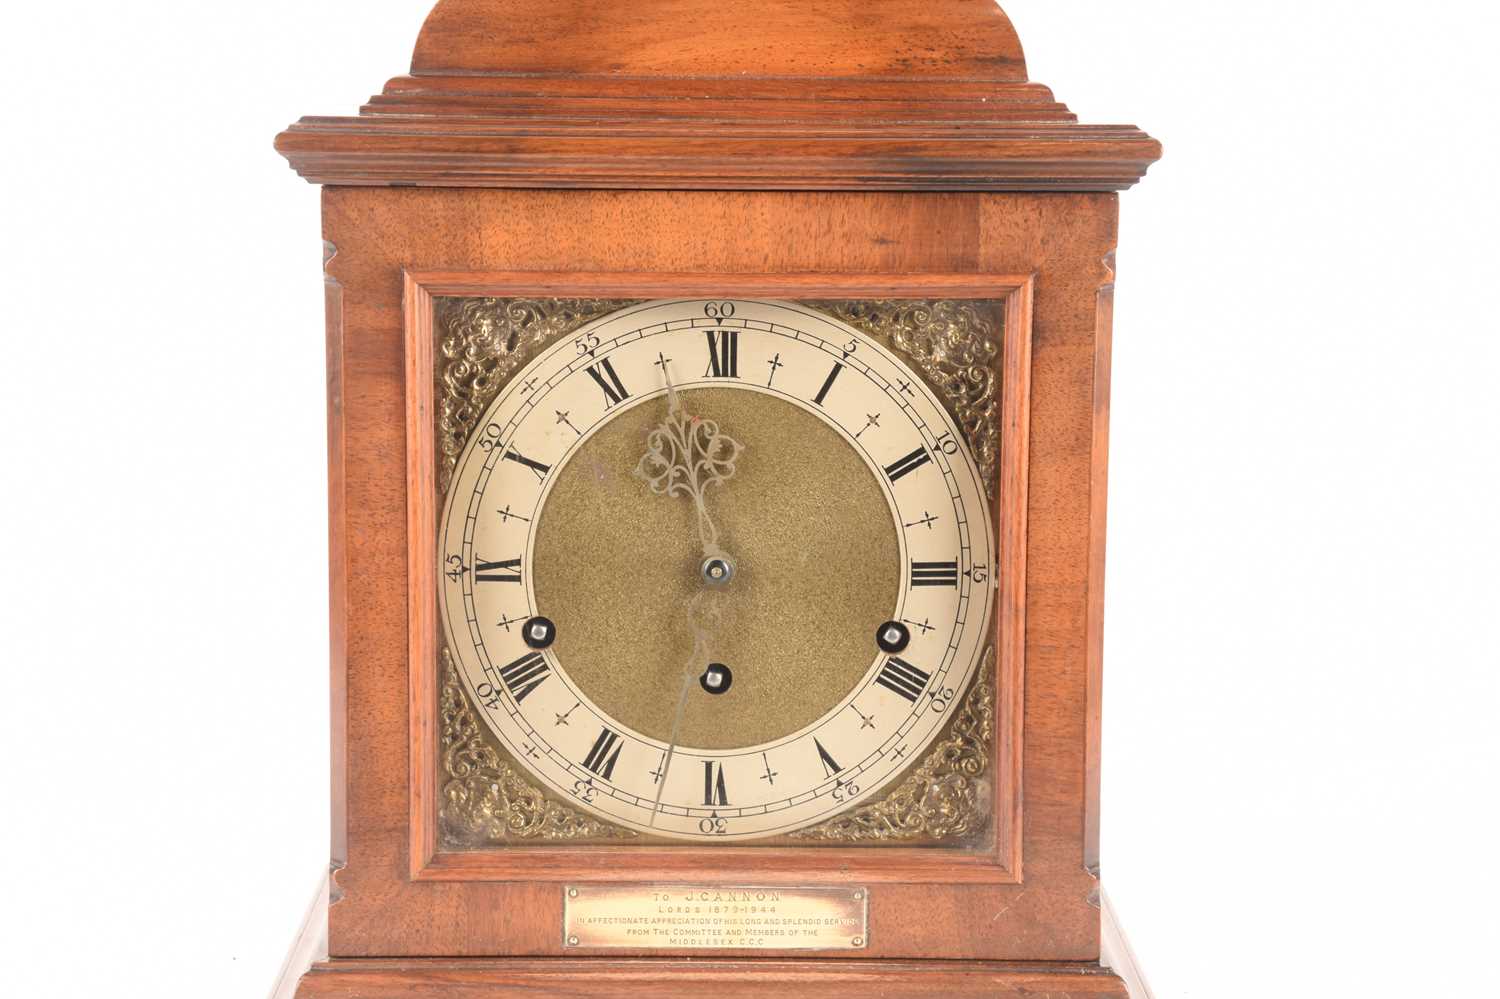 A mid-century bracket clock with a commemorative plaque, measures 41 cm tall. - Image 5 of 8